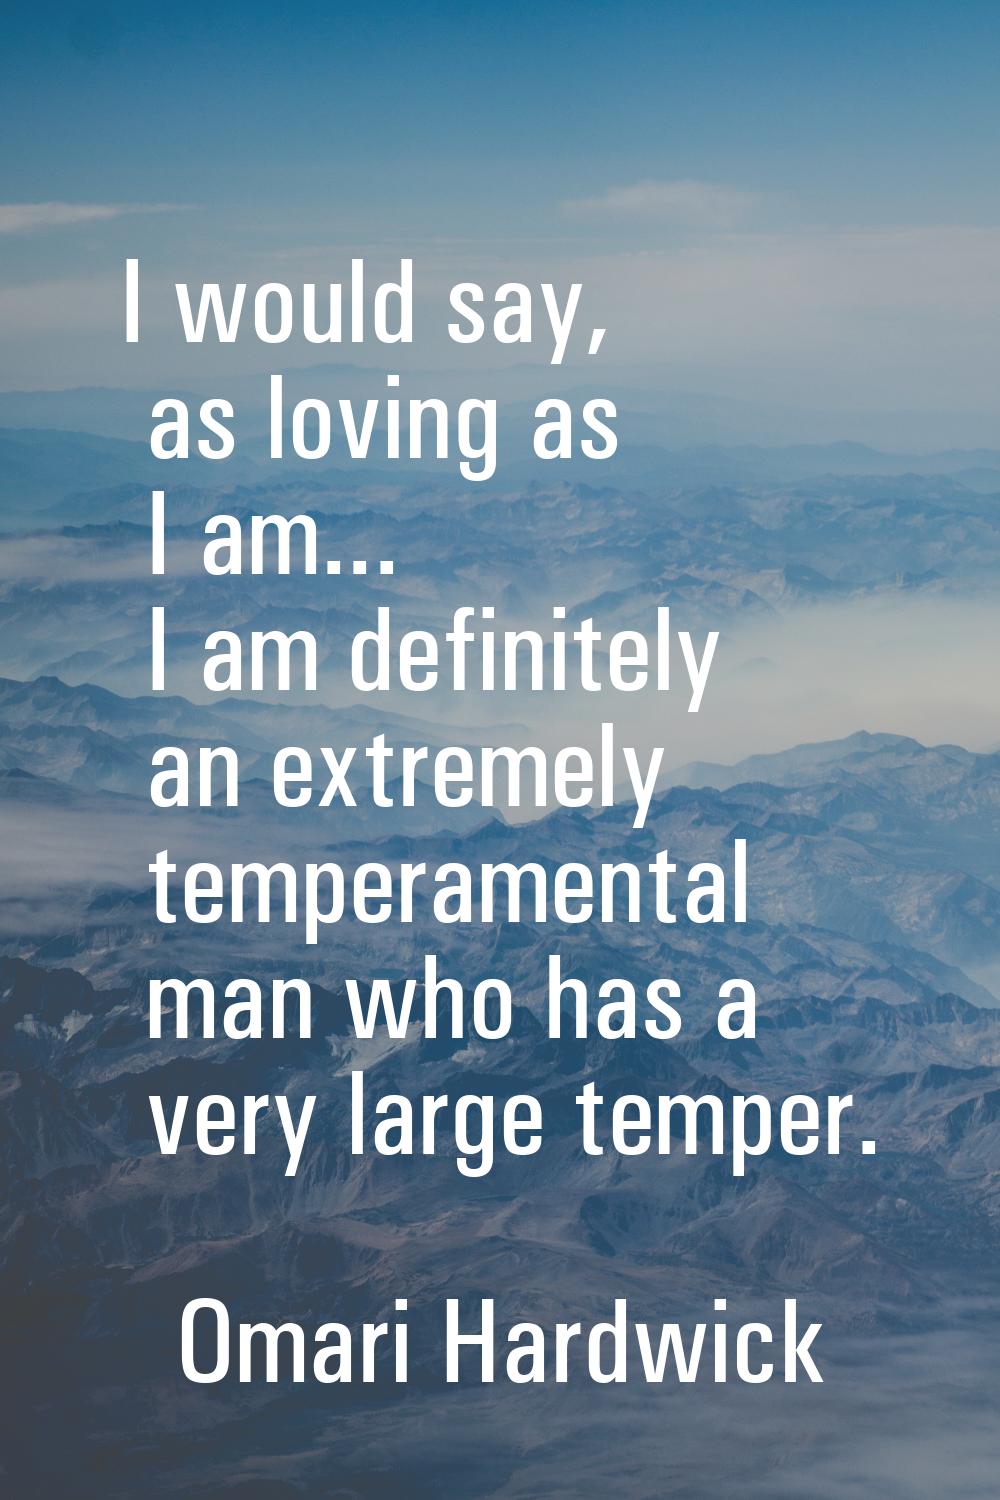 I would say, as loving as I am... I am definitely an extremely temperamental man who has a very lar